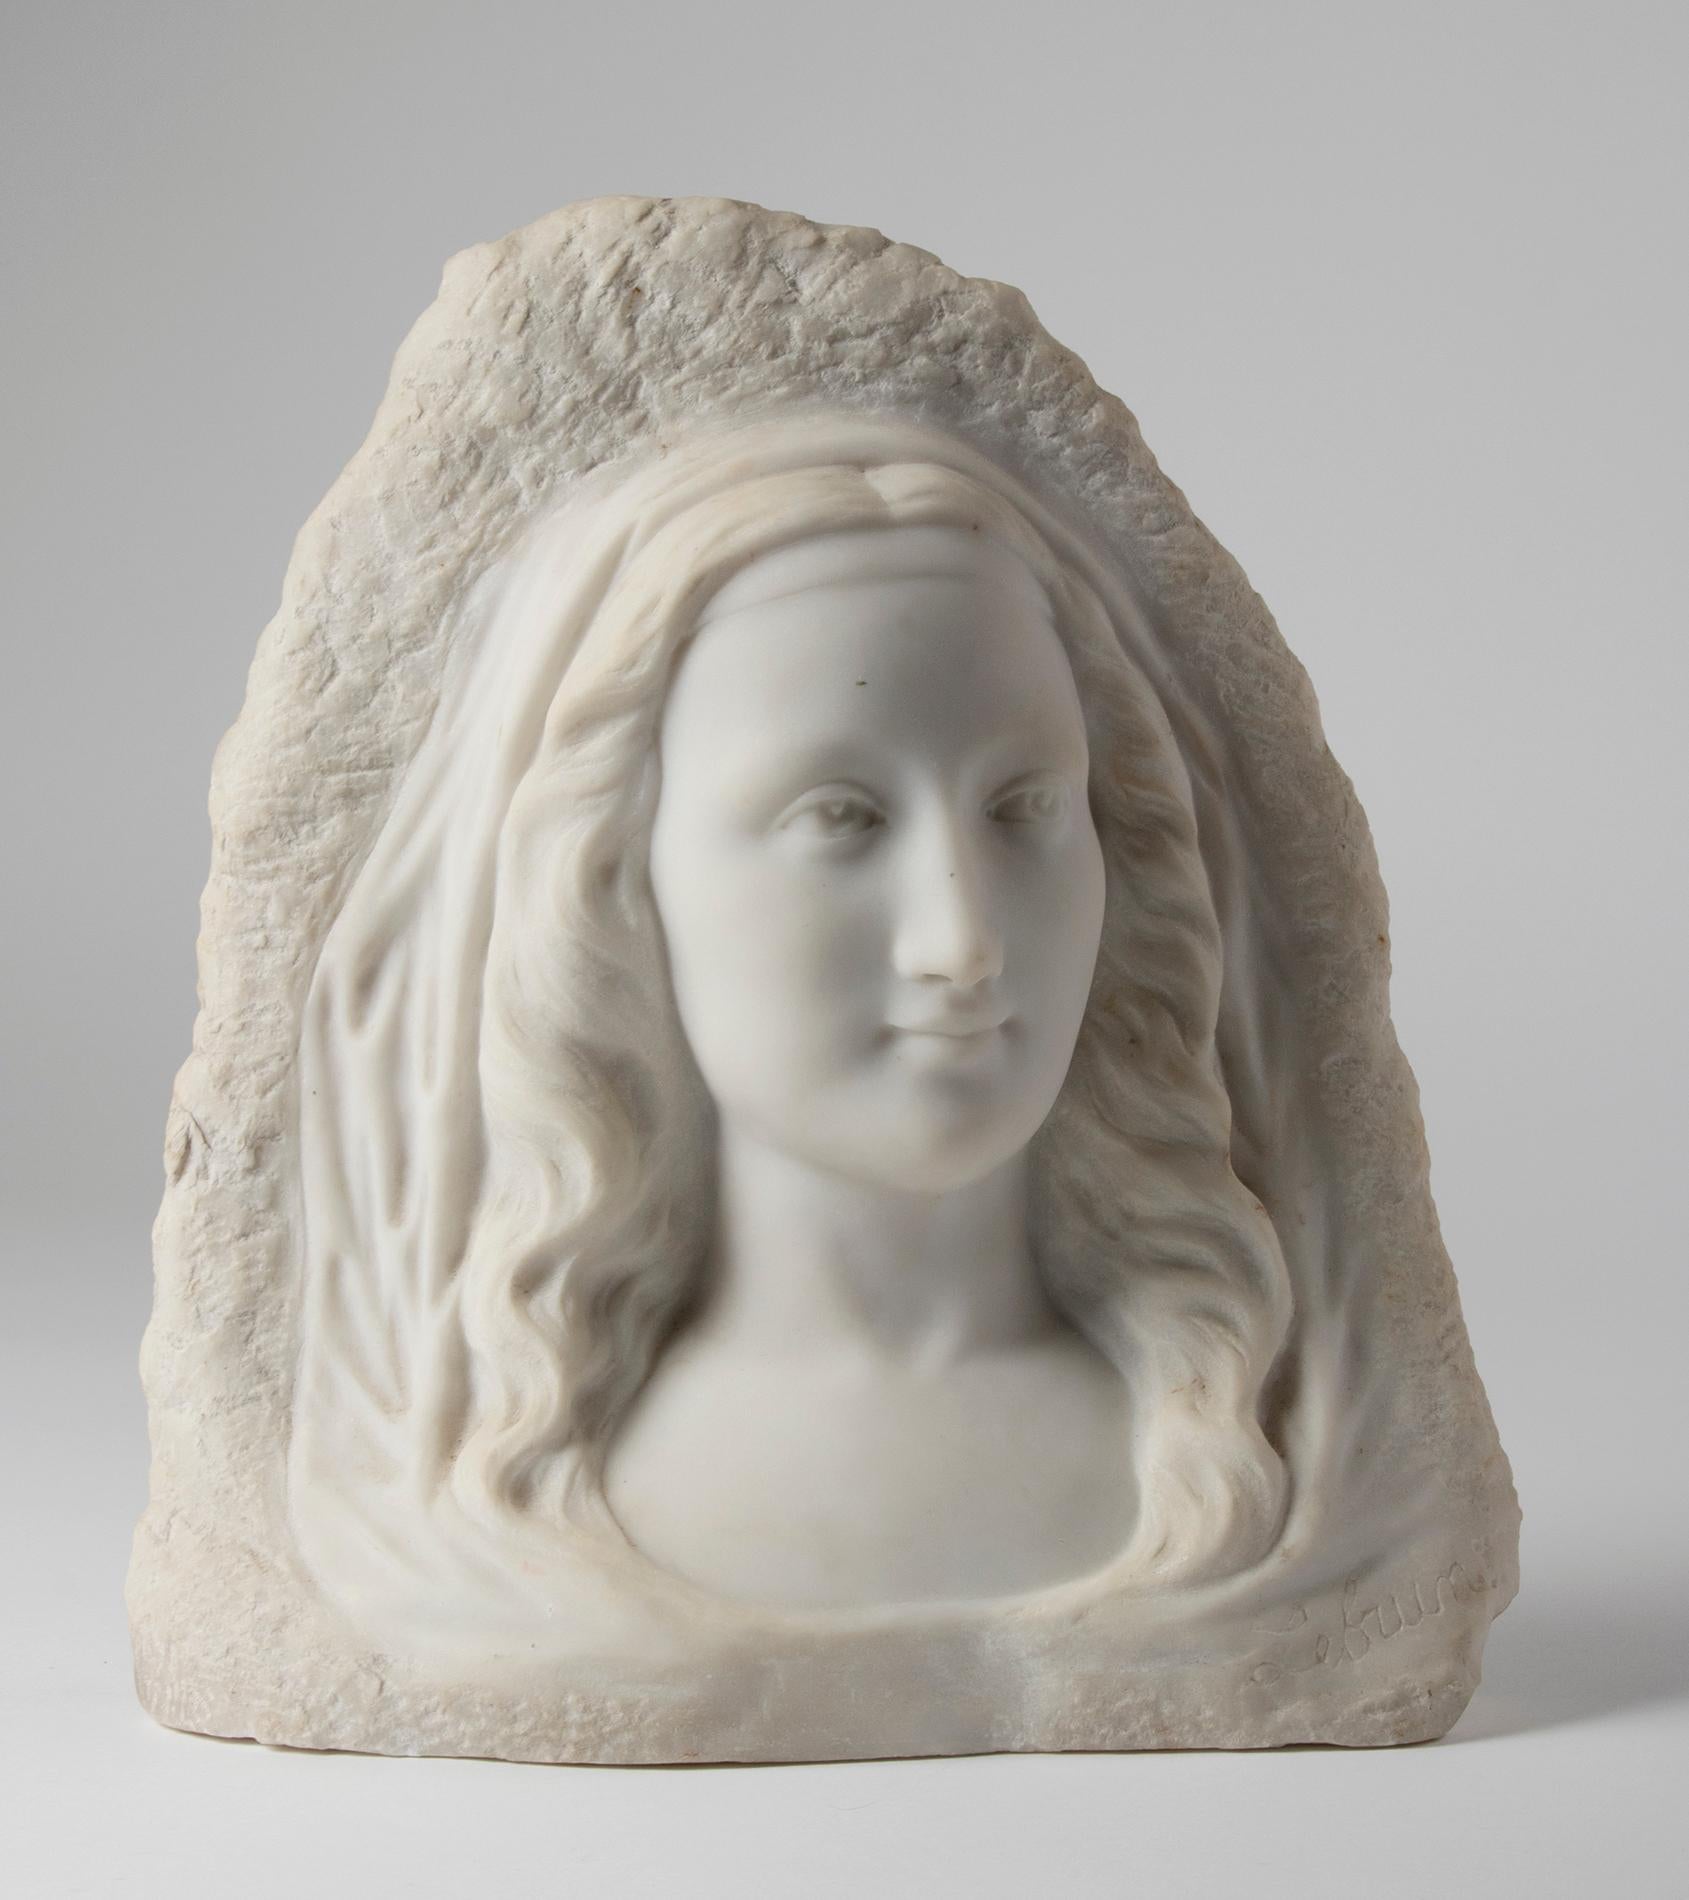 Beautiful marble statue, a portrait of a young woman, cut from Carrara marble. The statue has a beautiful artistic look. The woman's refined, serene face contrasts beautifully with the rough, unprocessed background of the Carrara marble. It is a